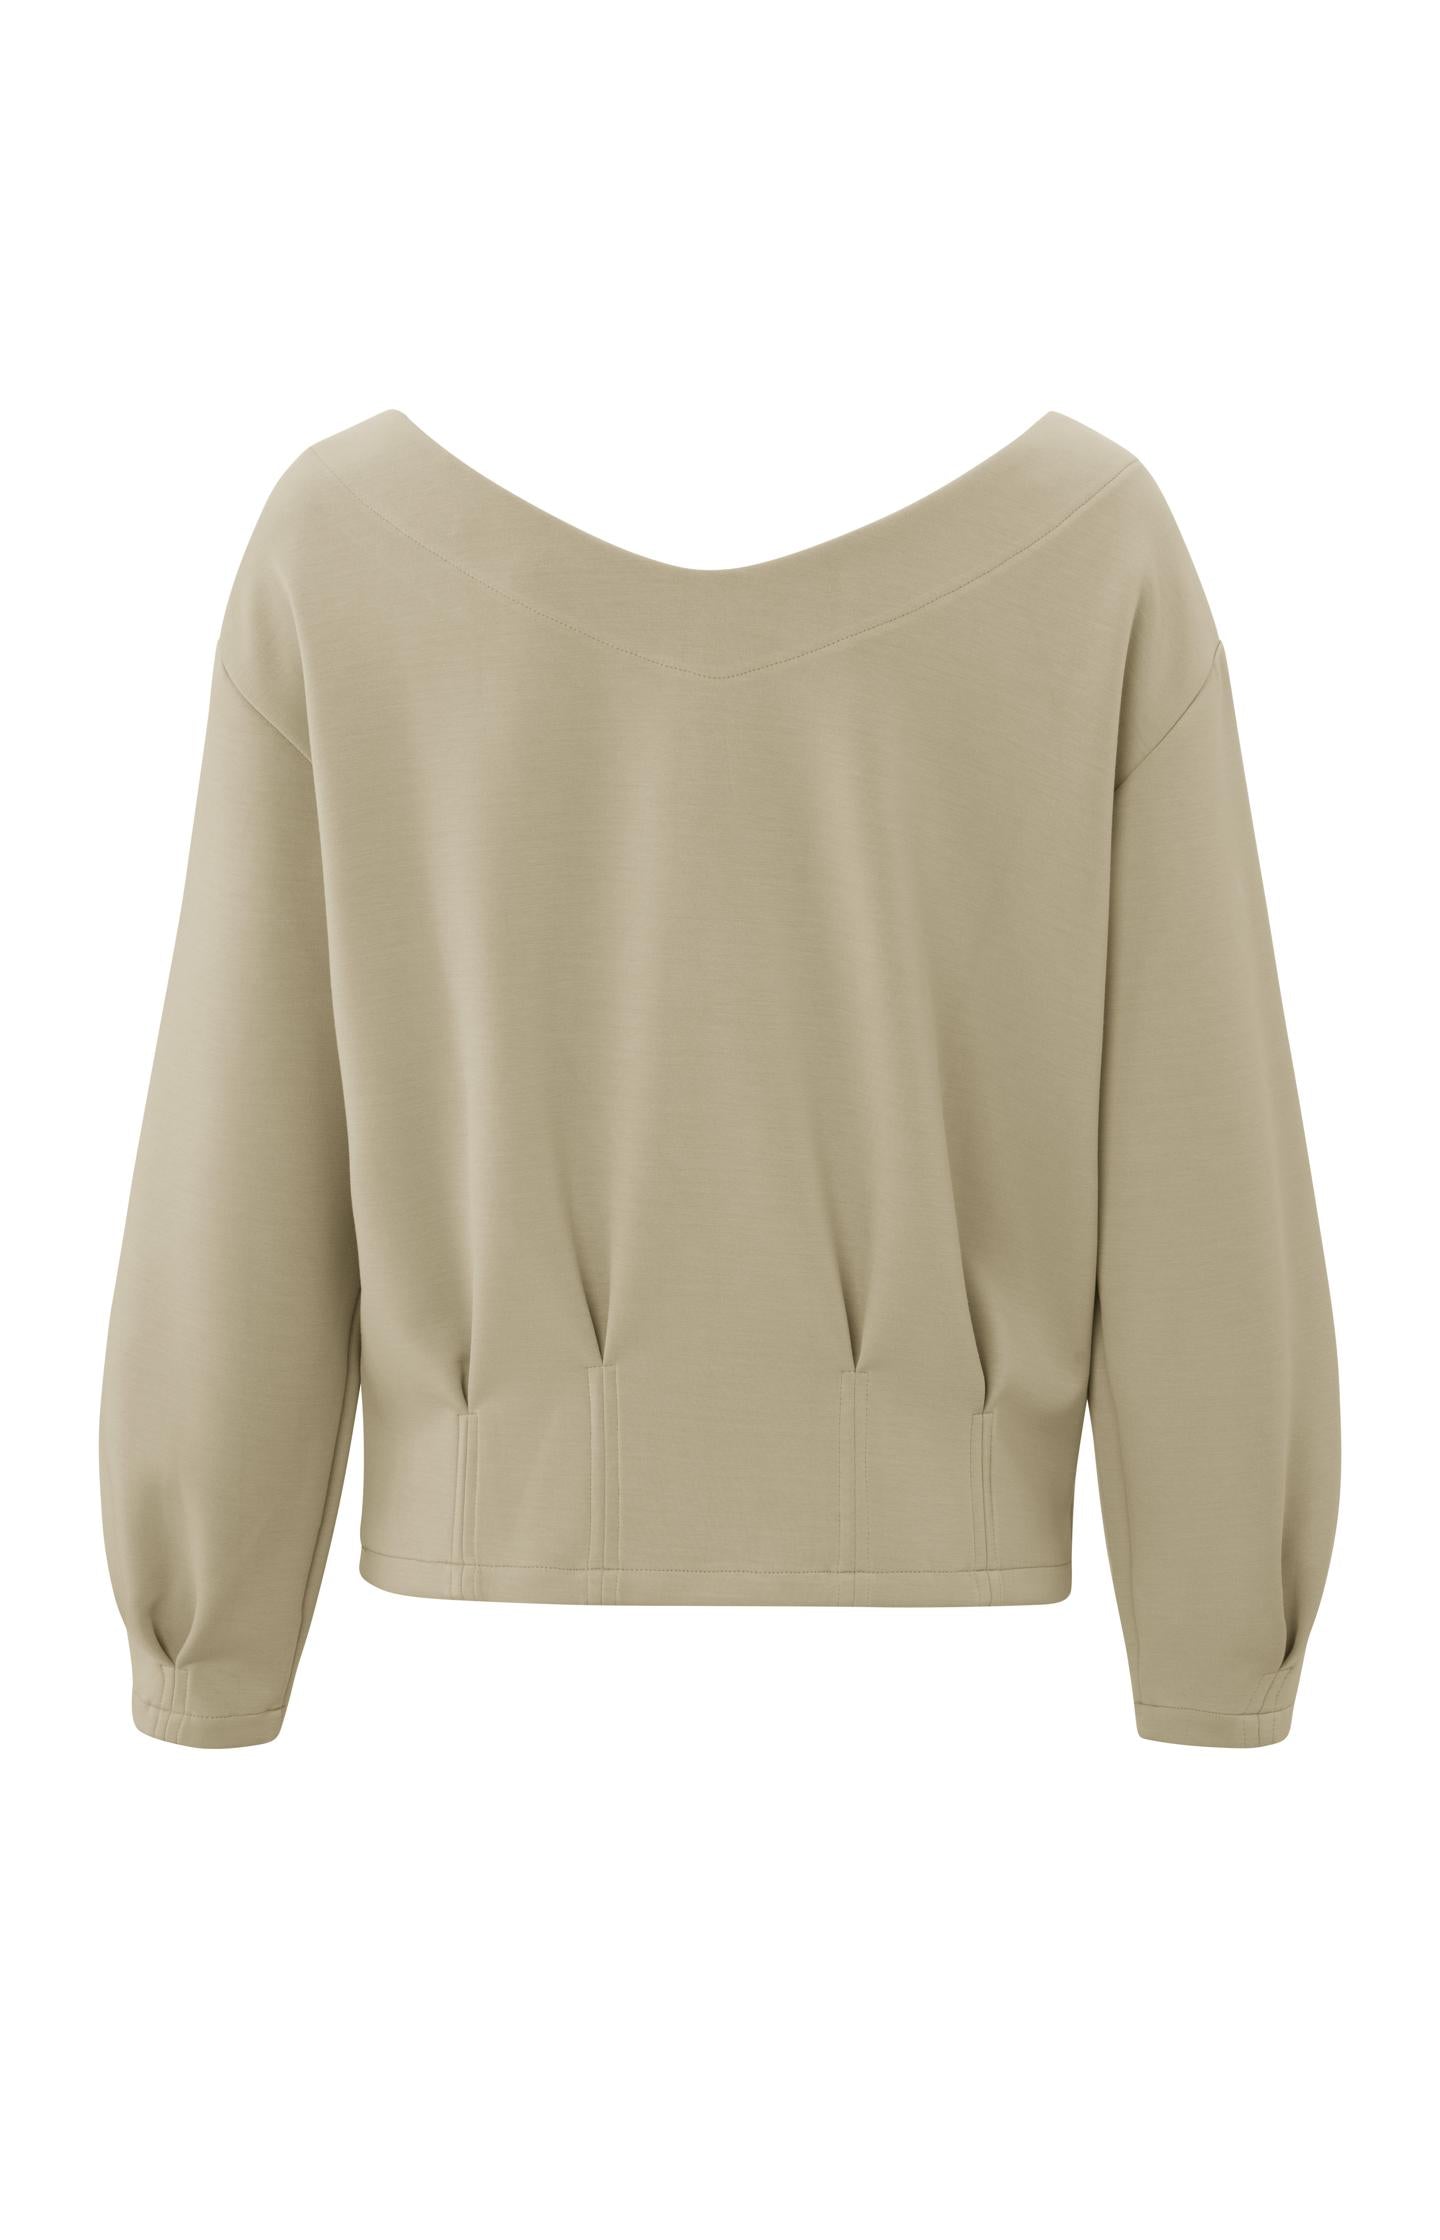 Sweatshirt with boatneck, long sleeves and pleated details